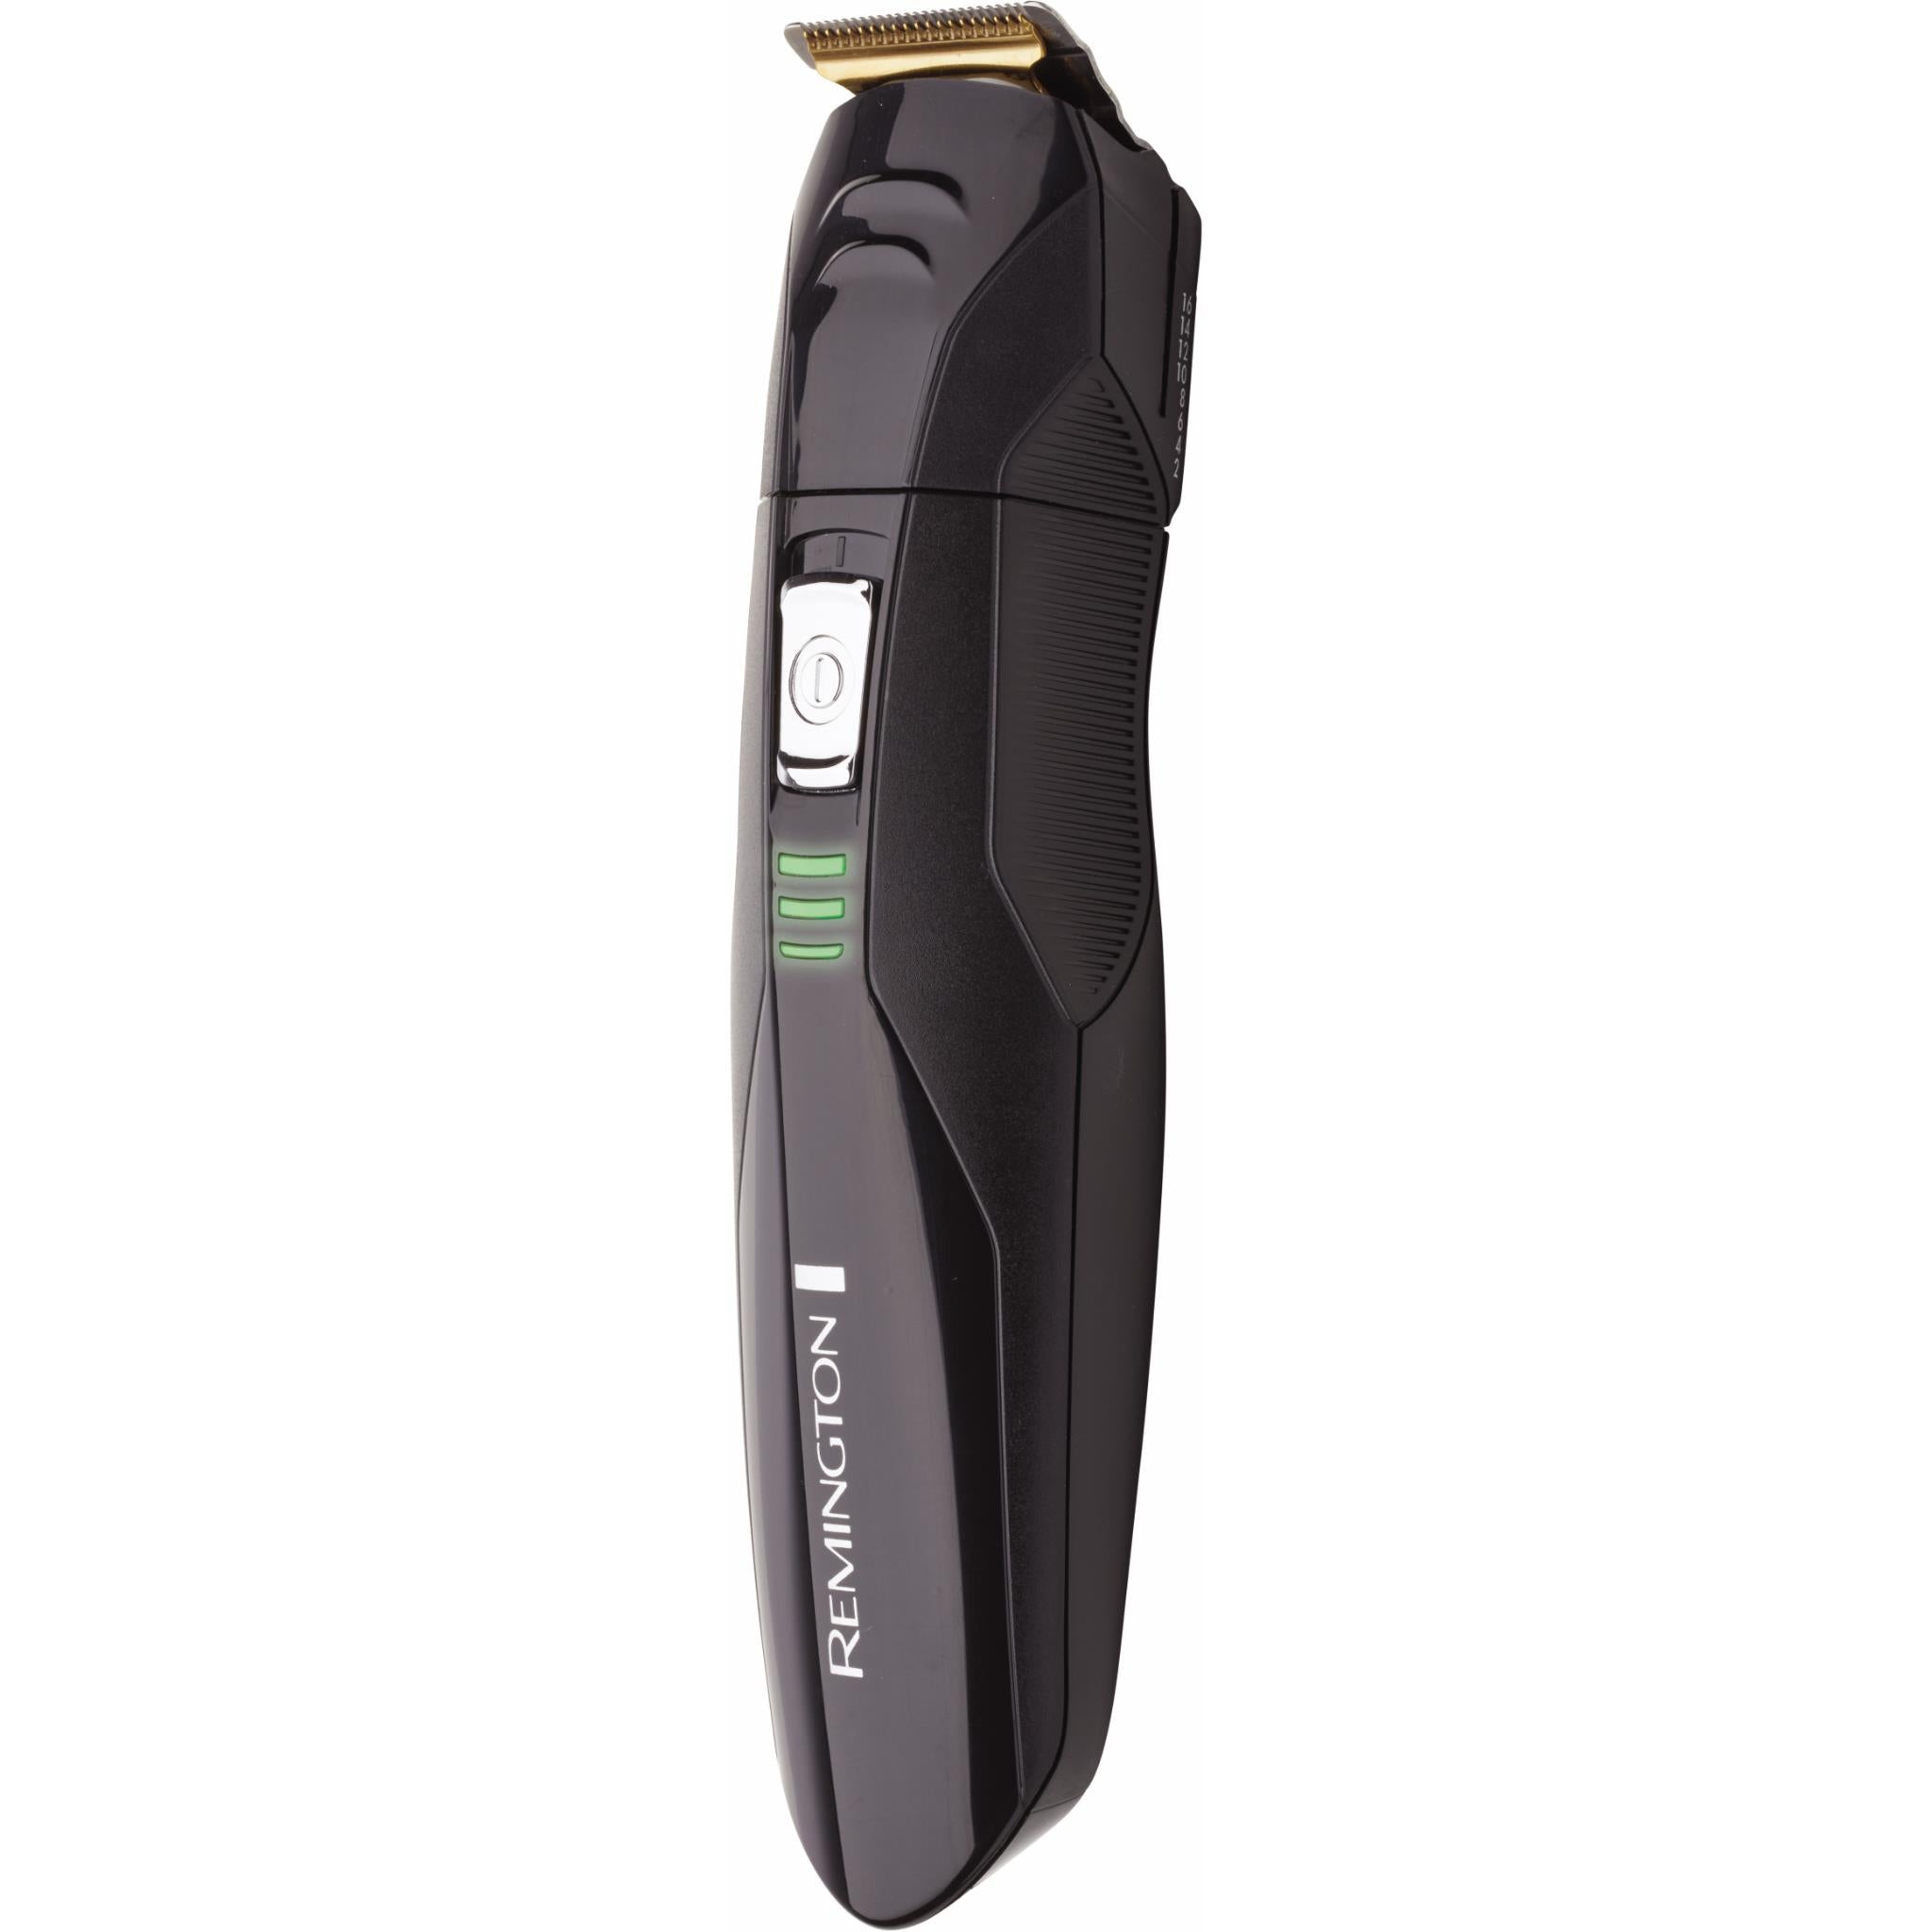 remington all-in-1 titanium grooming system